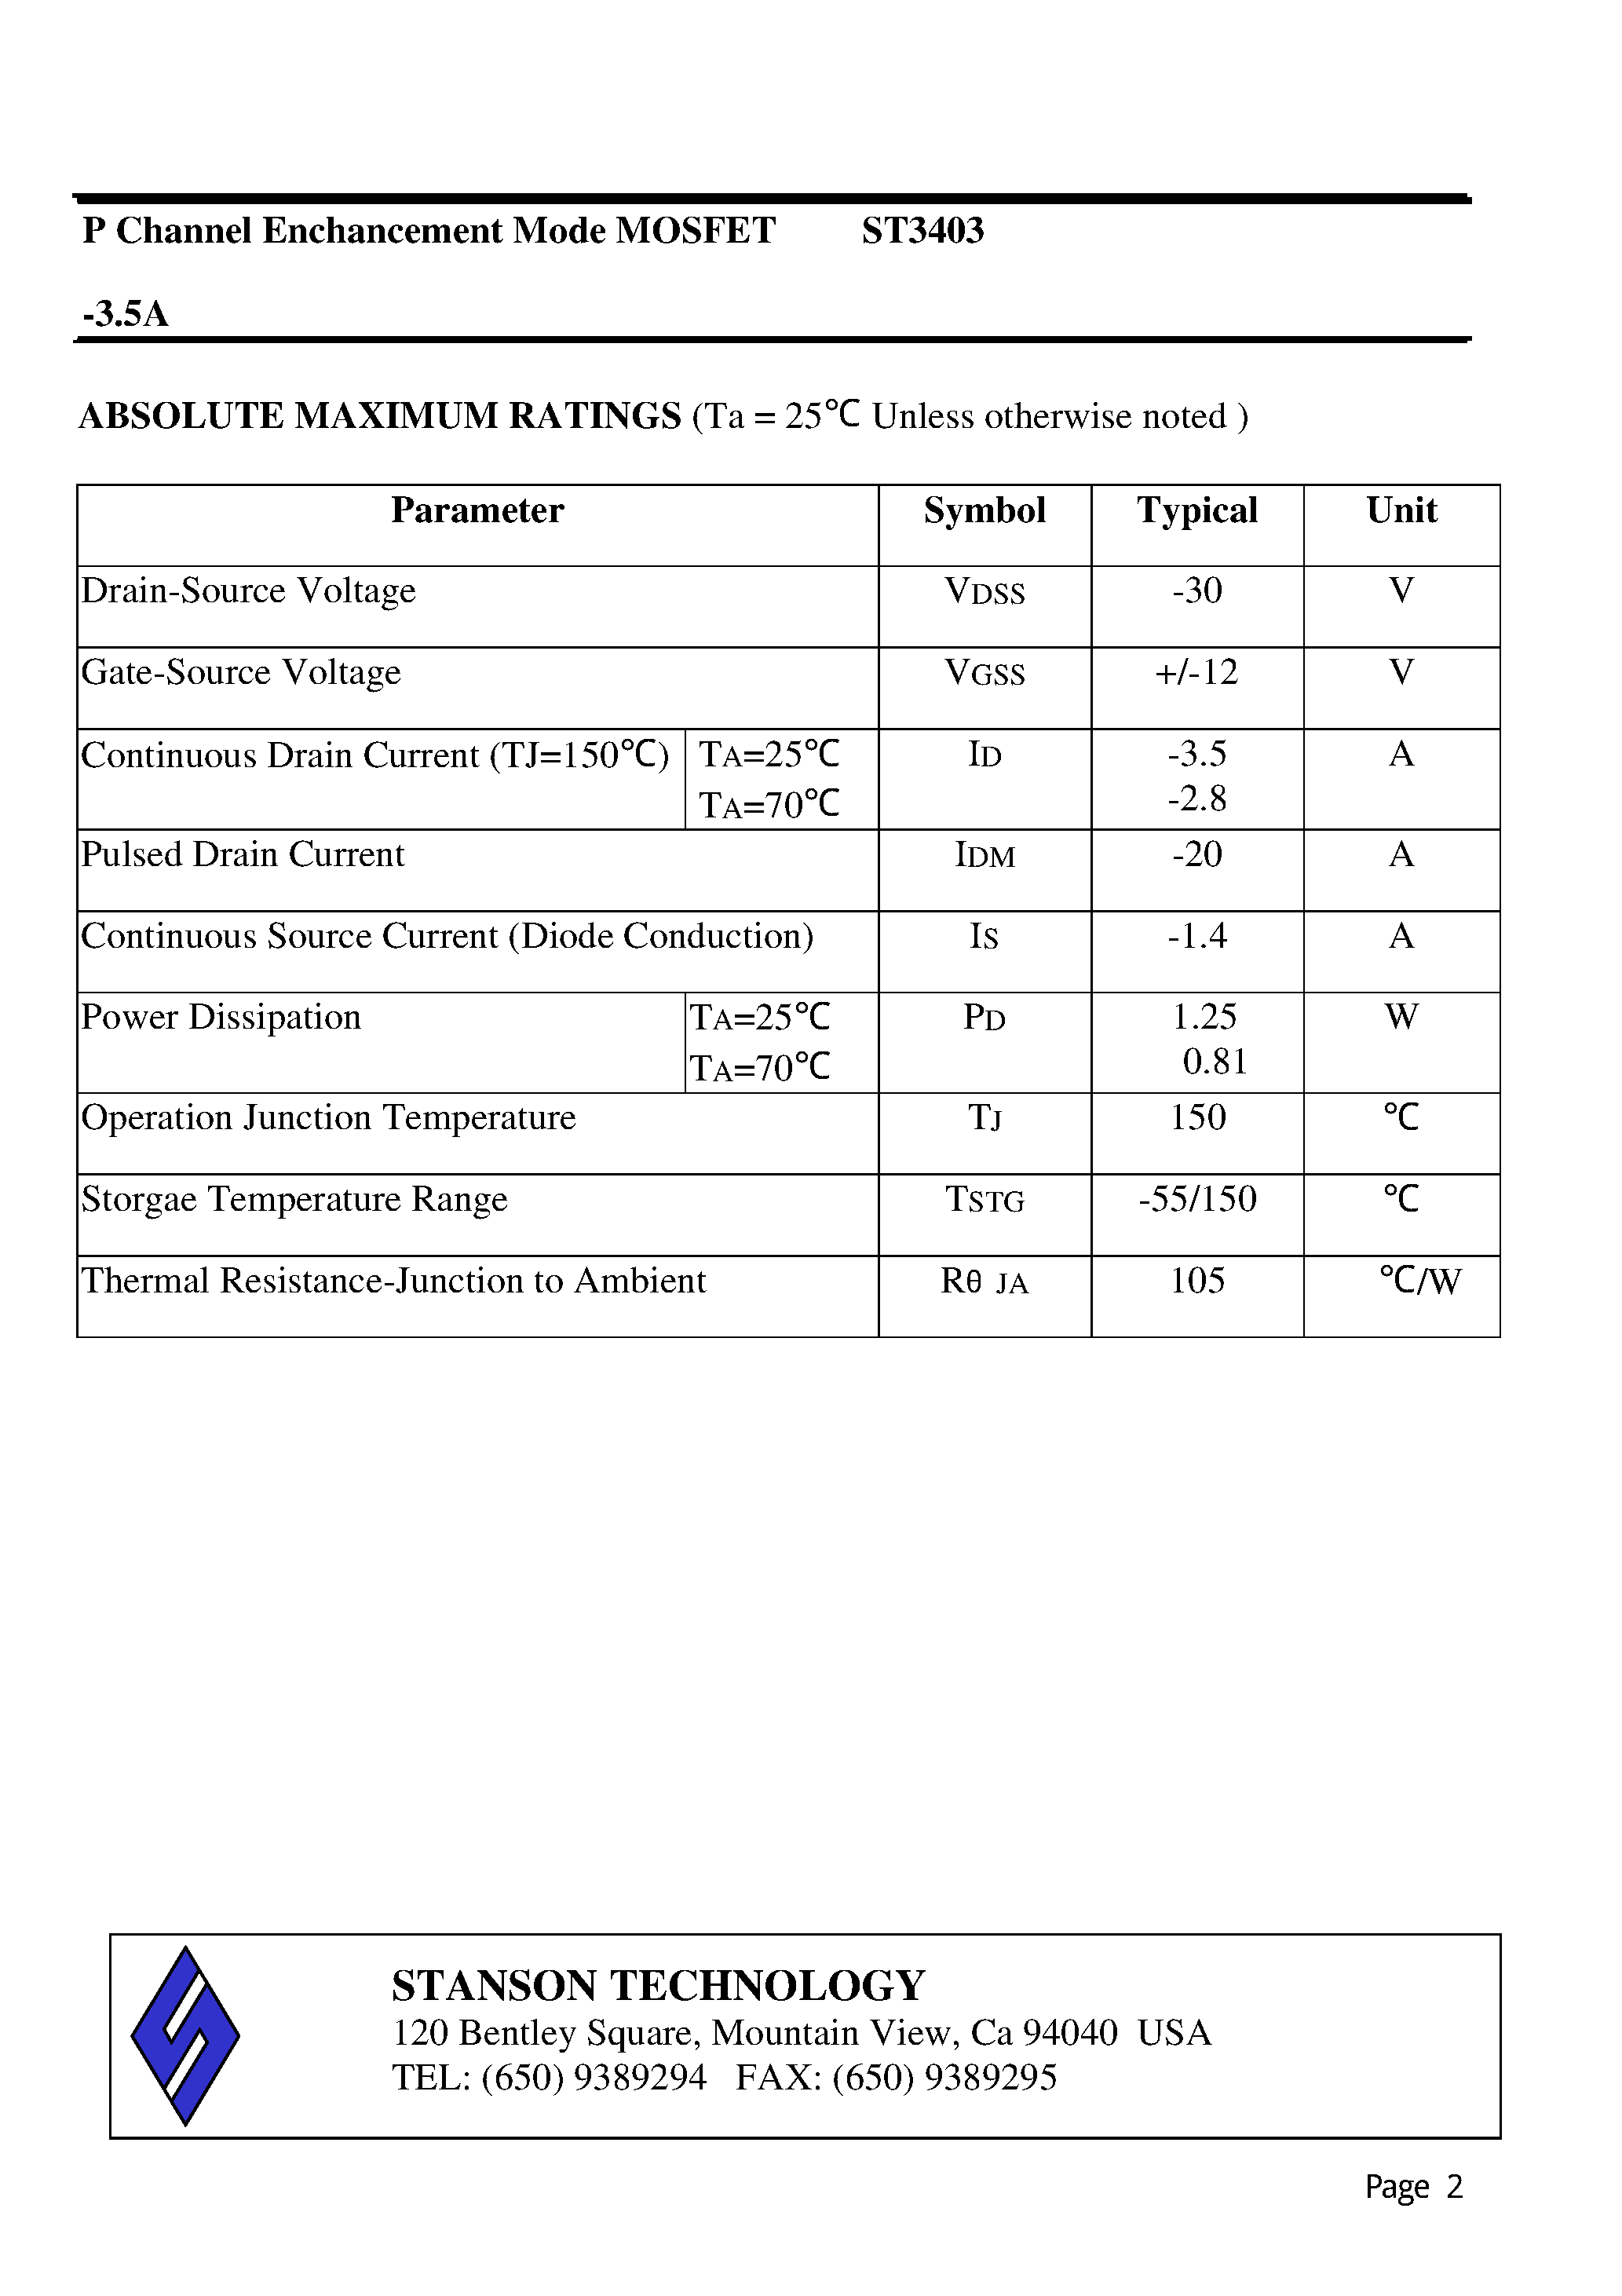 Datasheet ST3403 - P Channel Enchancement Mode MOSFET page 2